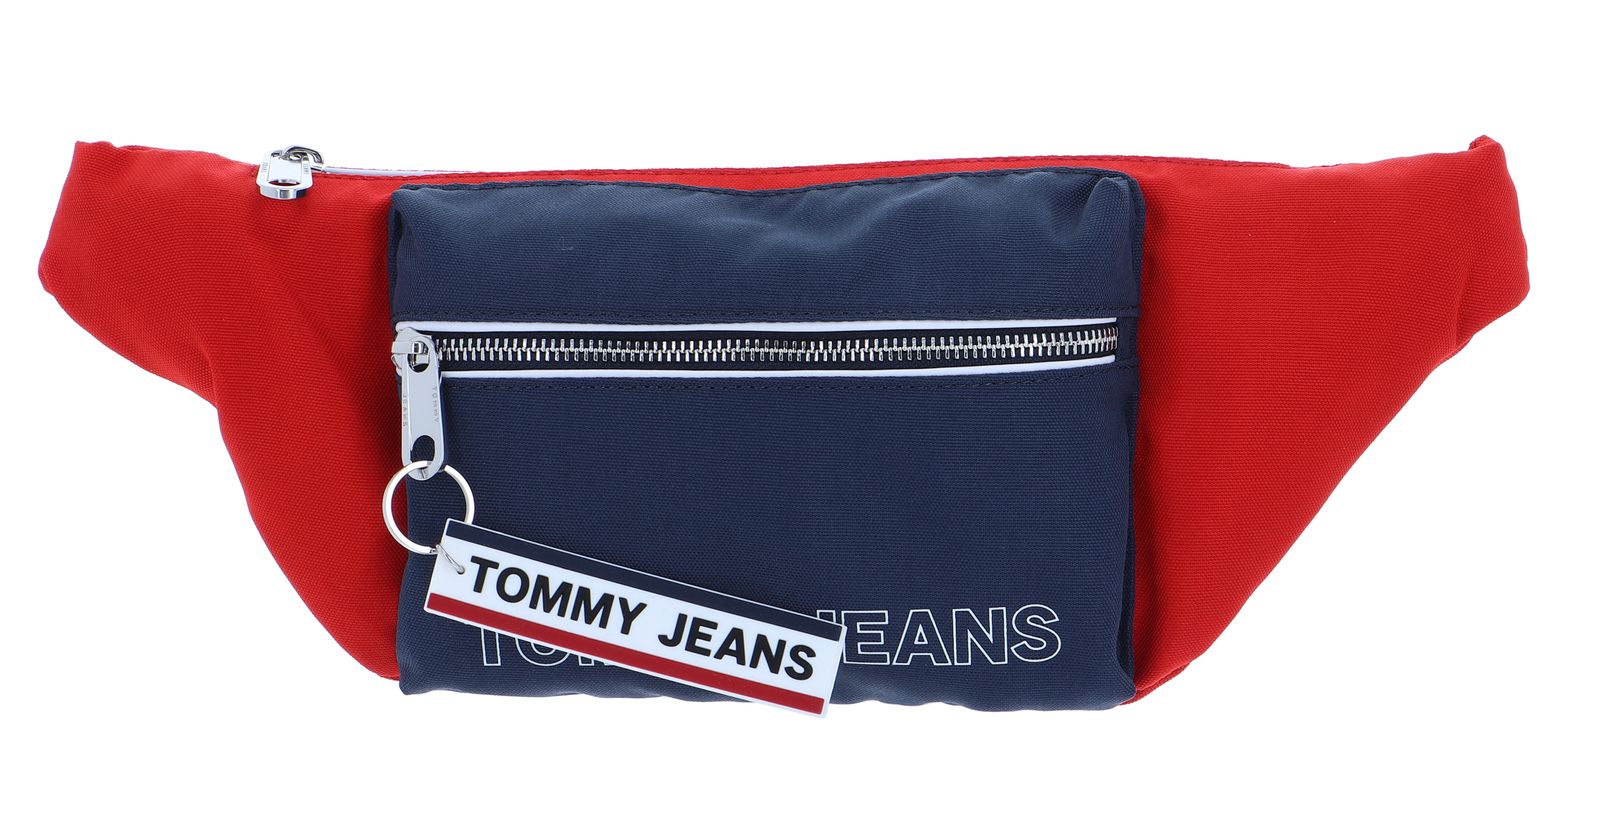 TOMMY HILFIGER Crossover Corporate 